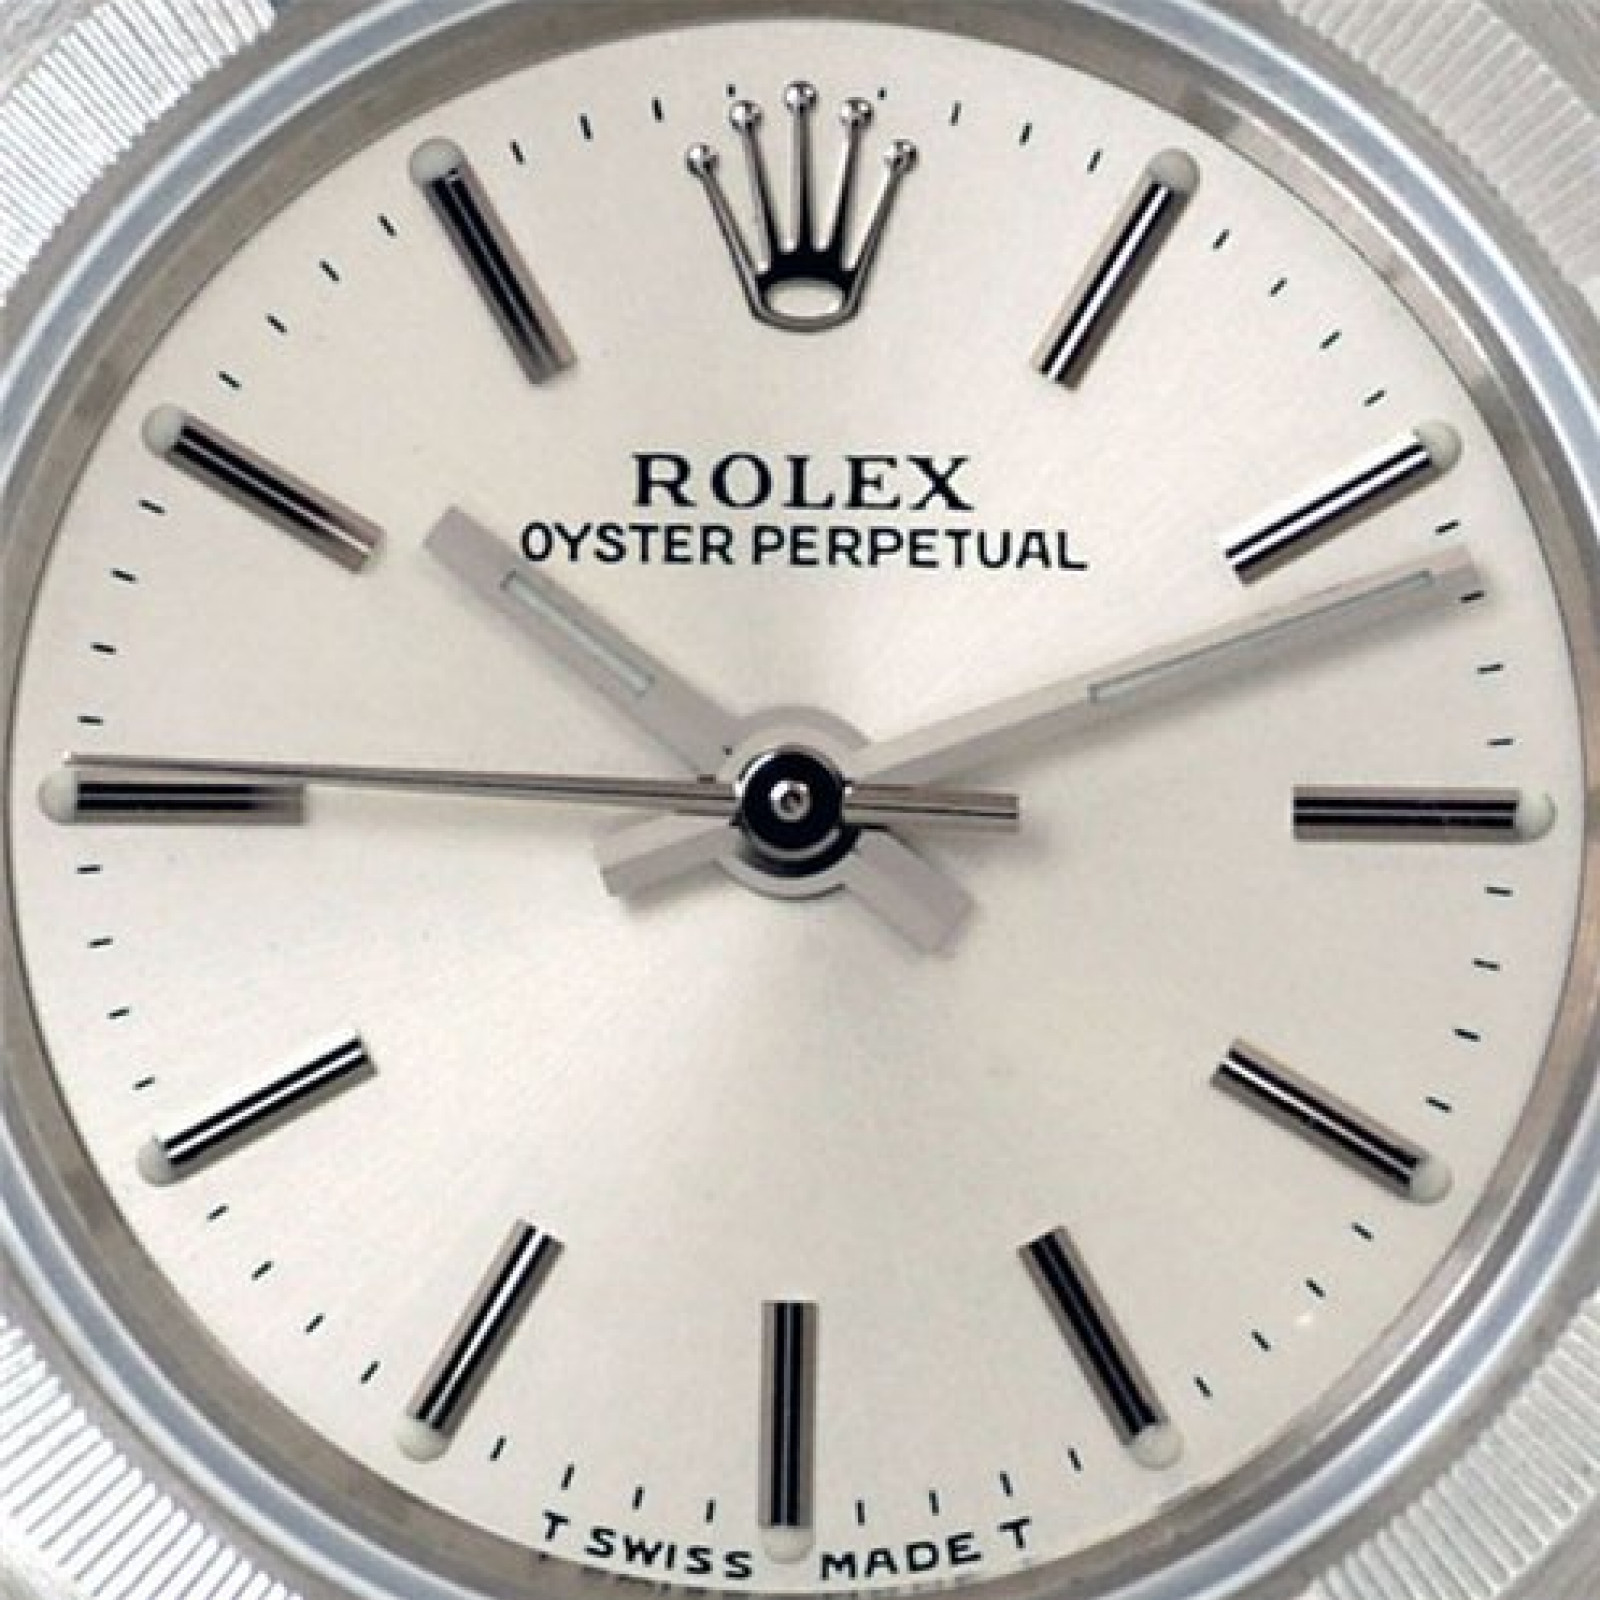 Rolex Oyster Perpetual 76030 Steel